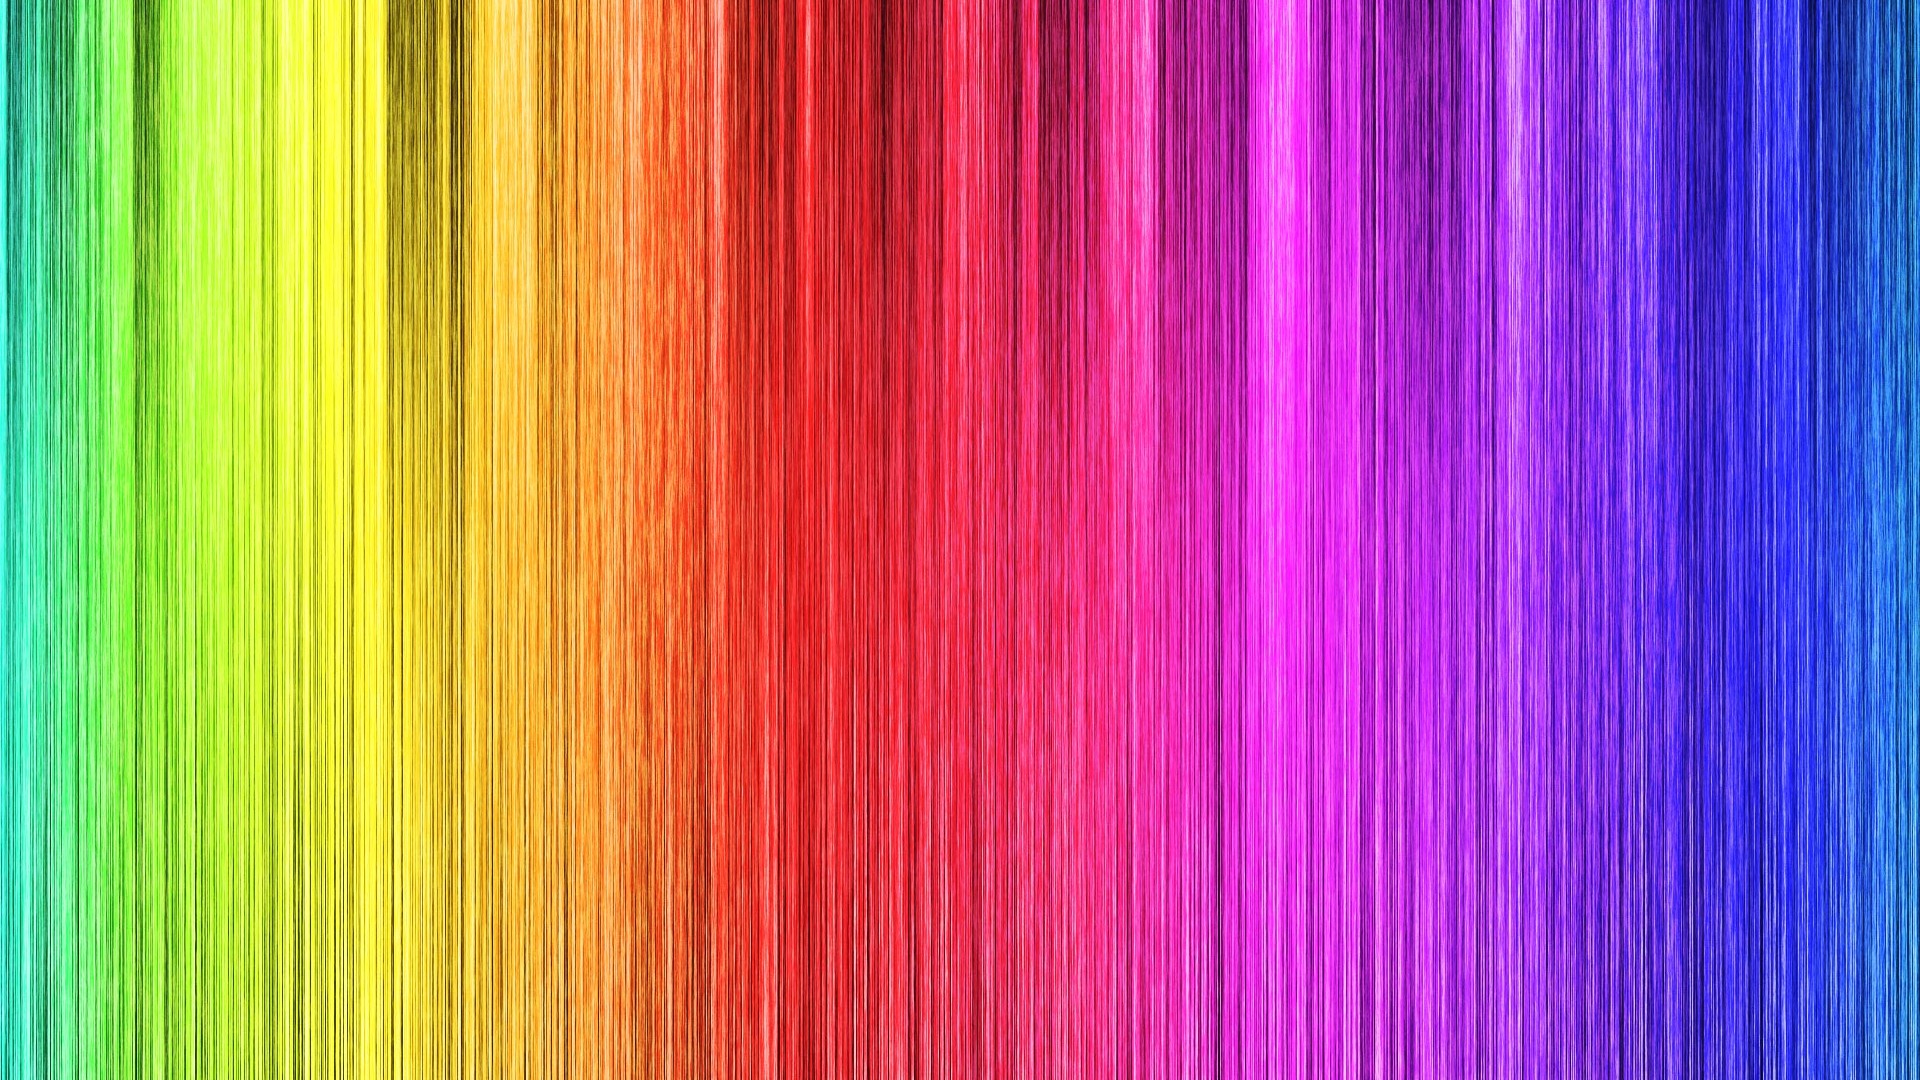 Computer Wallpapers Rainbow with resolution 1920X1080 pixel. You can use this wallpaper as background for your desktop Computer Screensavers, Android or iPhone smartphones